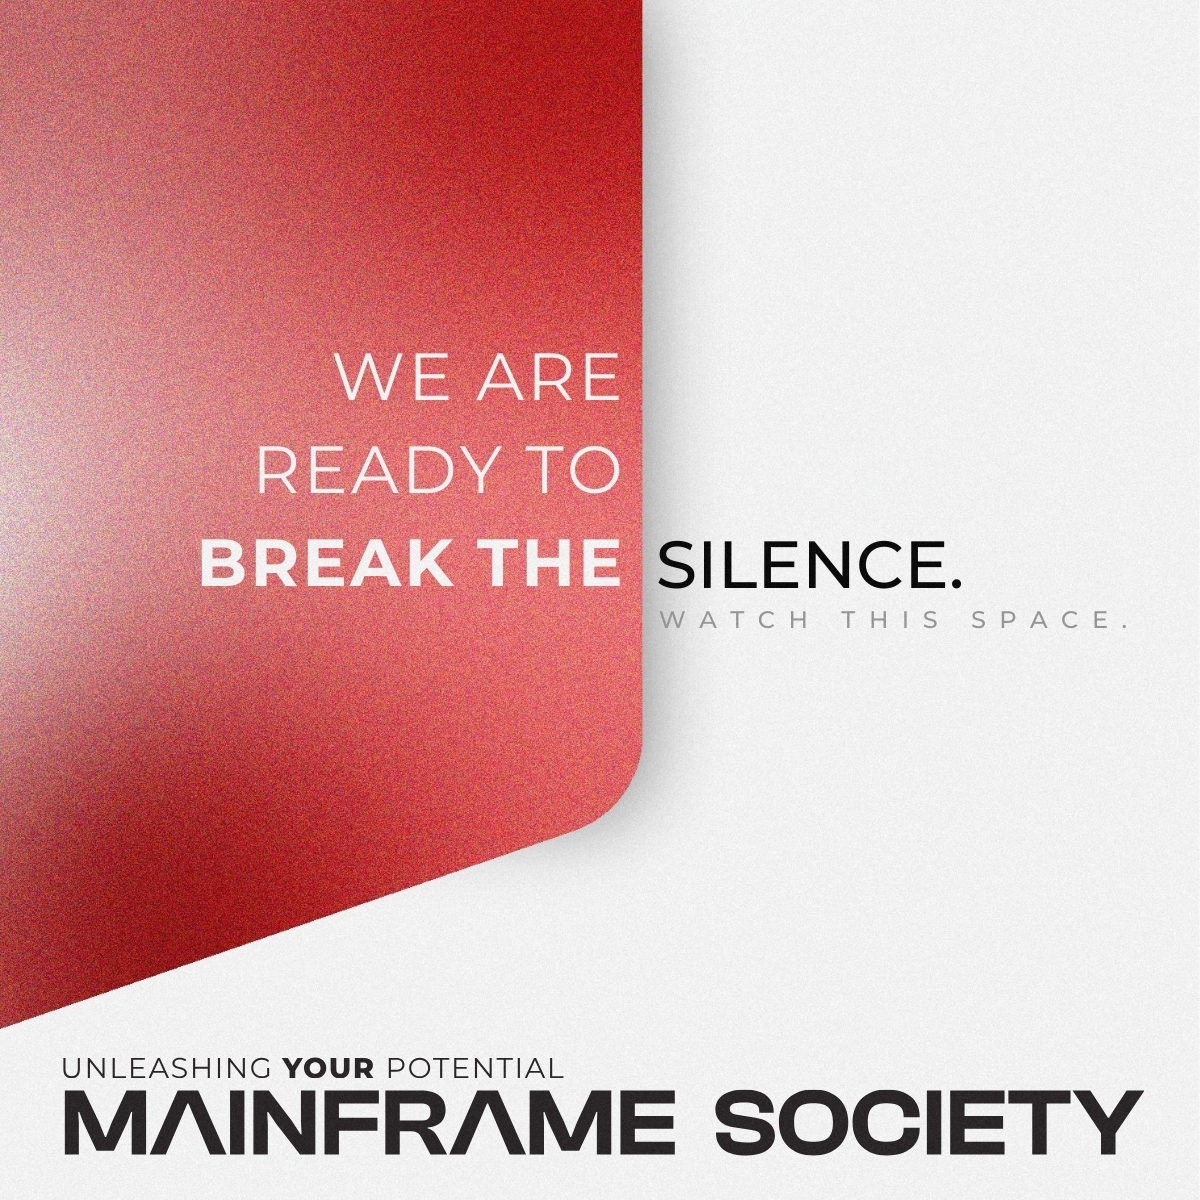 Exciting times ahead for Mainframe Society! We've been quiet here, but not idle. Stay tuned—major events are on the horizon, and we can't wait to share what's coming down the pipeline. 

#MainframeSociety 
#StayTuned 
#WatchThisSpace